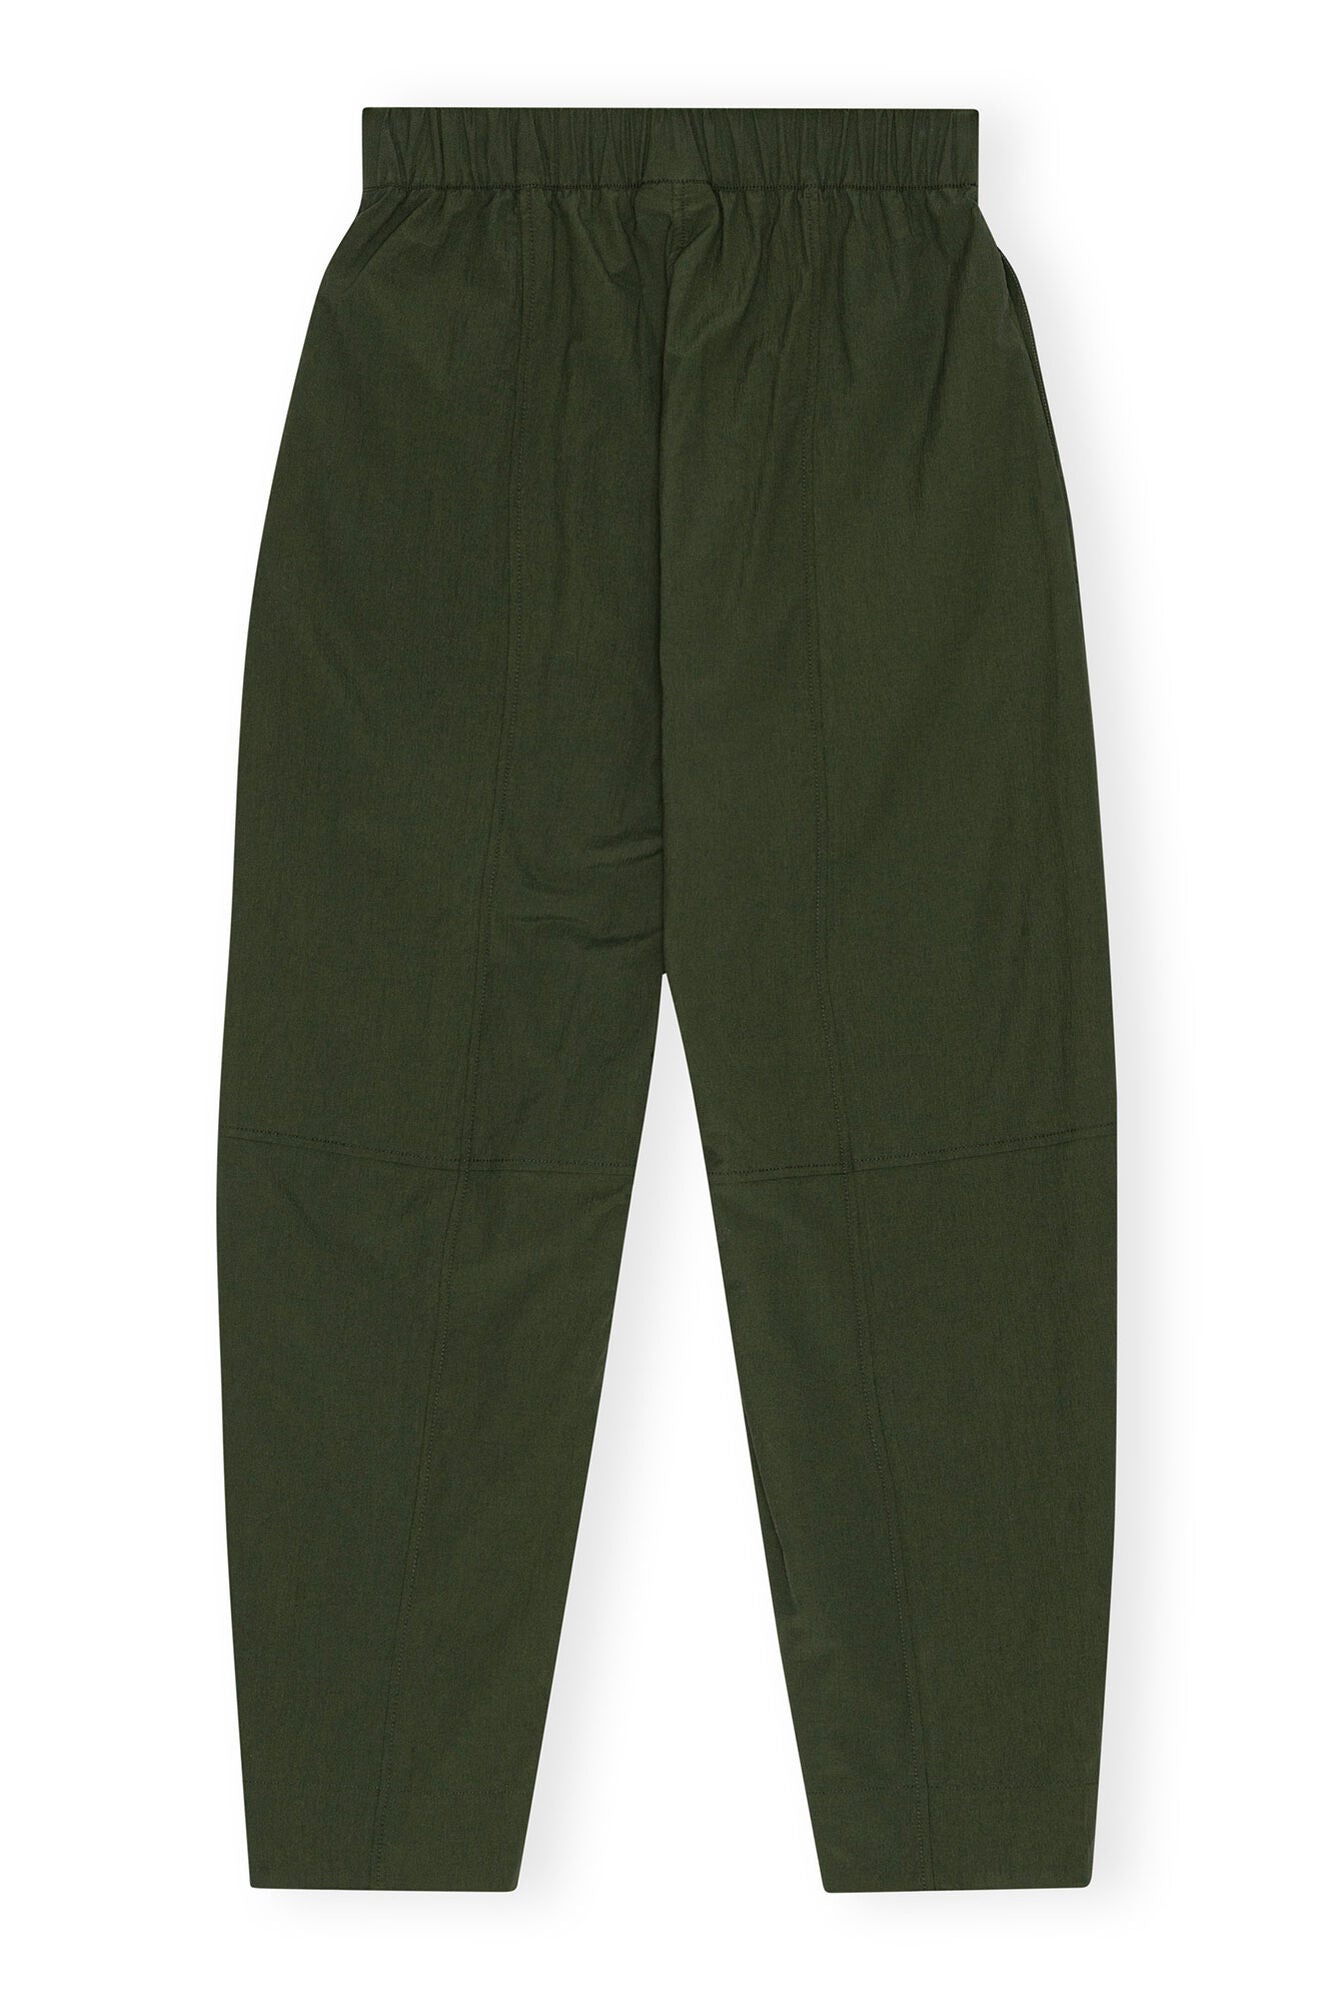 Ganni modern high-waisted trousers green cotton crepe curved-leg | Pipe and Row